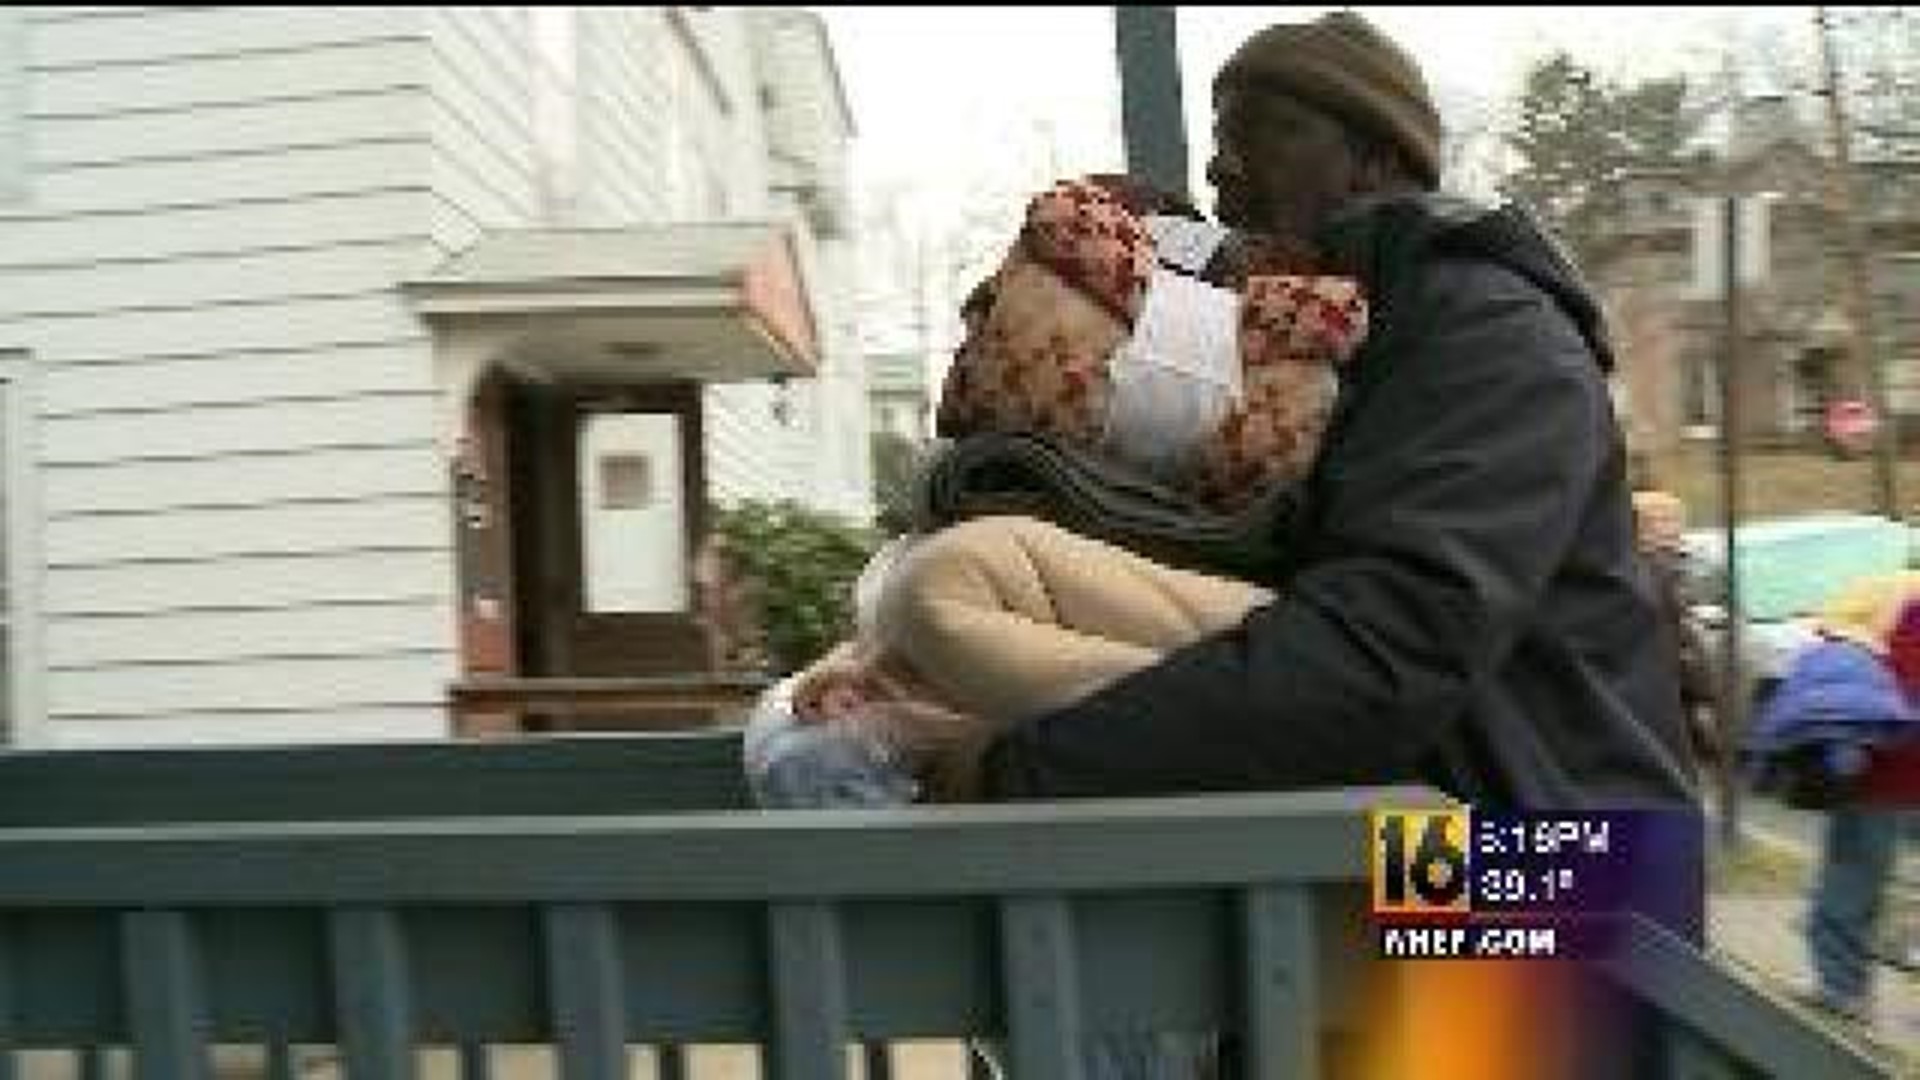 Teen Delivers Warmth Again for Holiday Season